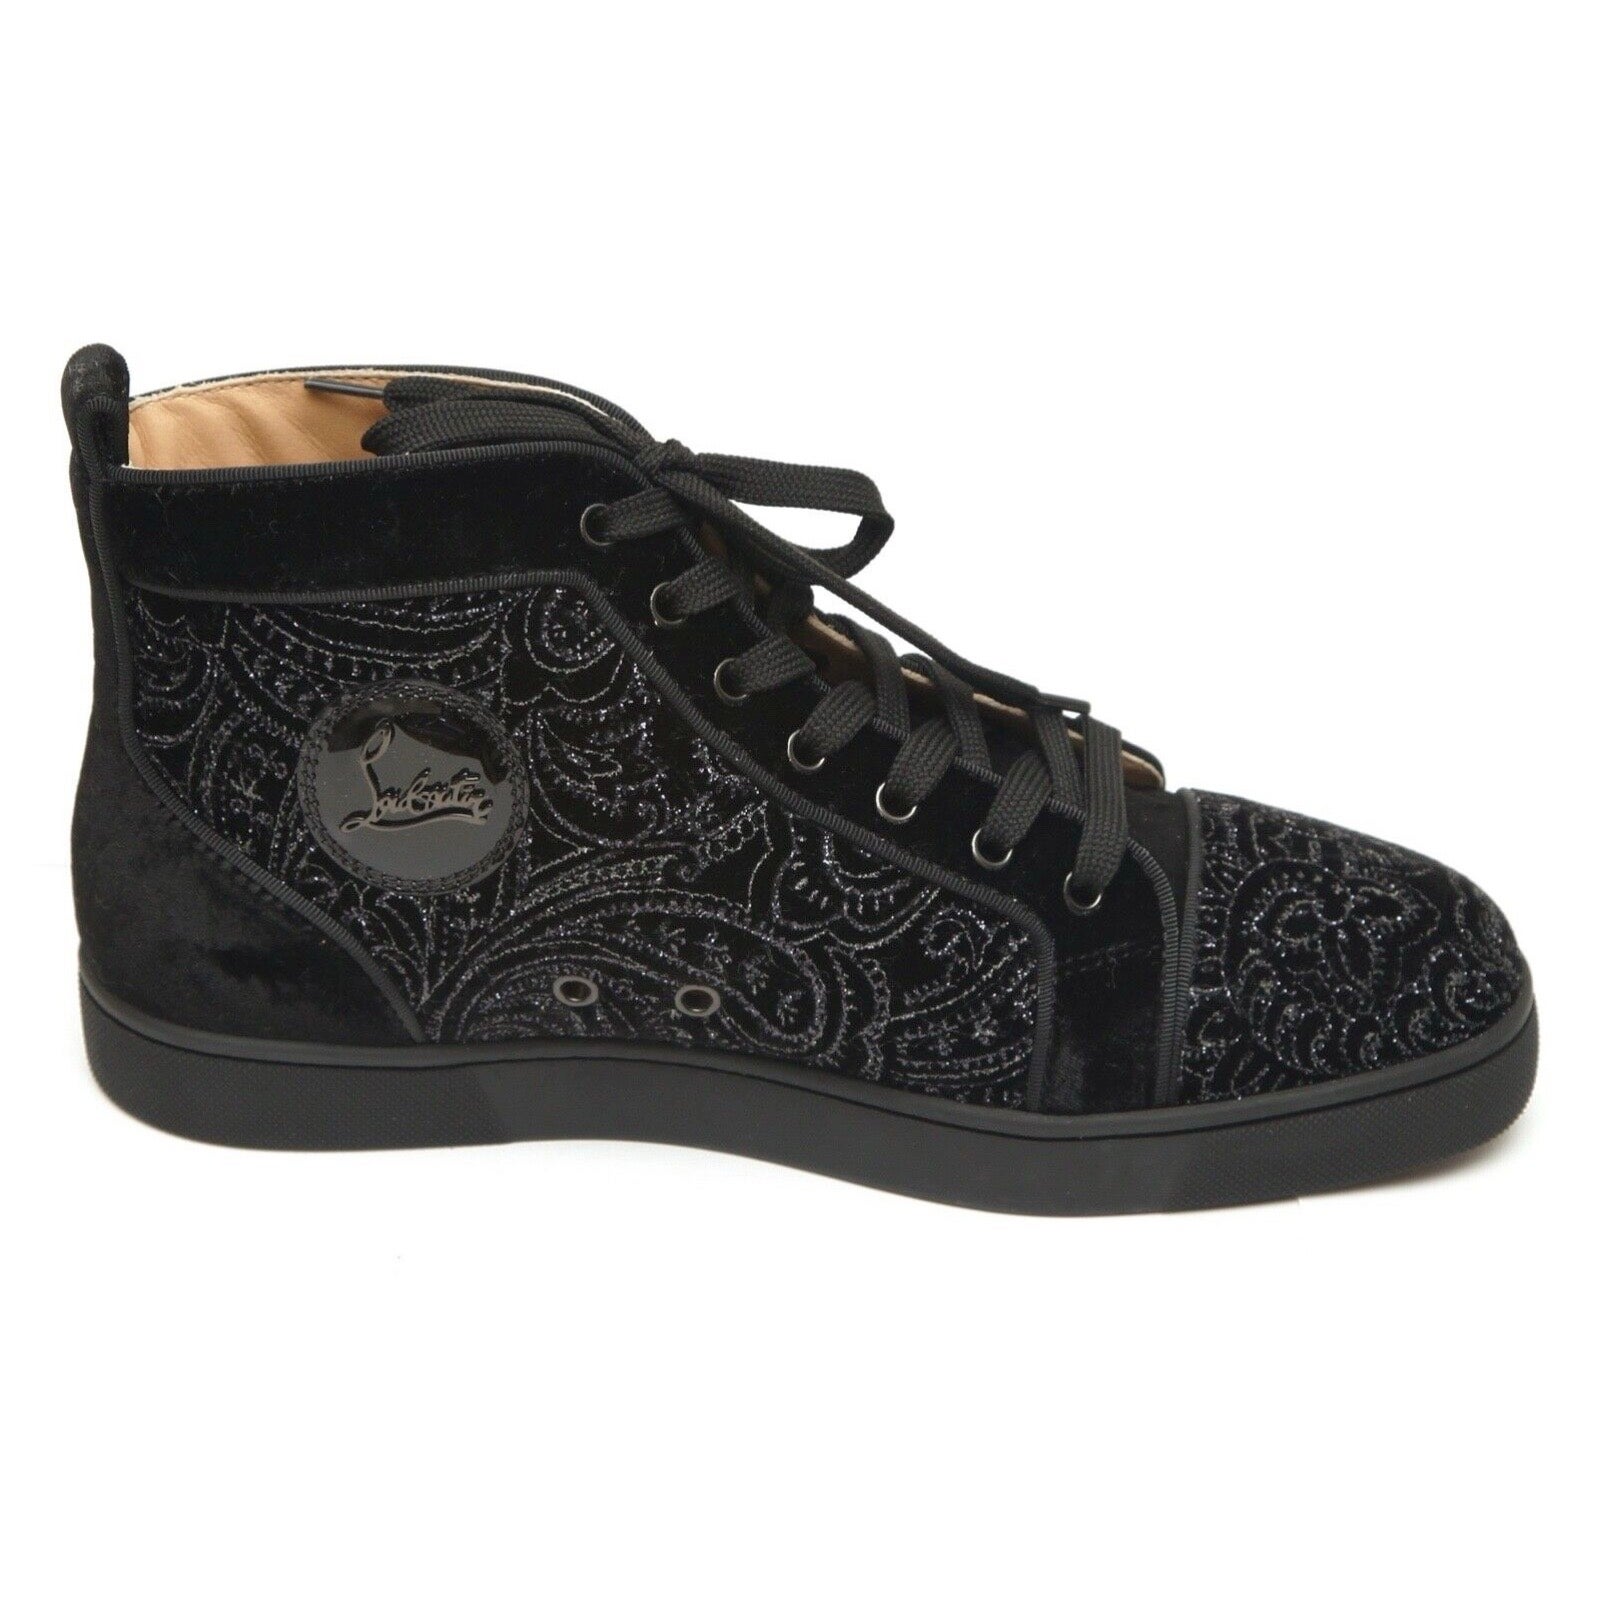 GUARANTEED AUTHENTIC CHRISTIAN LOUBOUTIN MEN'S LOUIS ORLATO SNEAKERS

Authenticated by Authenticatefirst

Design:
- High top sneaker style in black velvet.
- Iridescent paisley print at sides.
- Grosgrain piping trim.
- Lace up closure.
- Leather